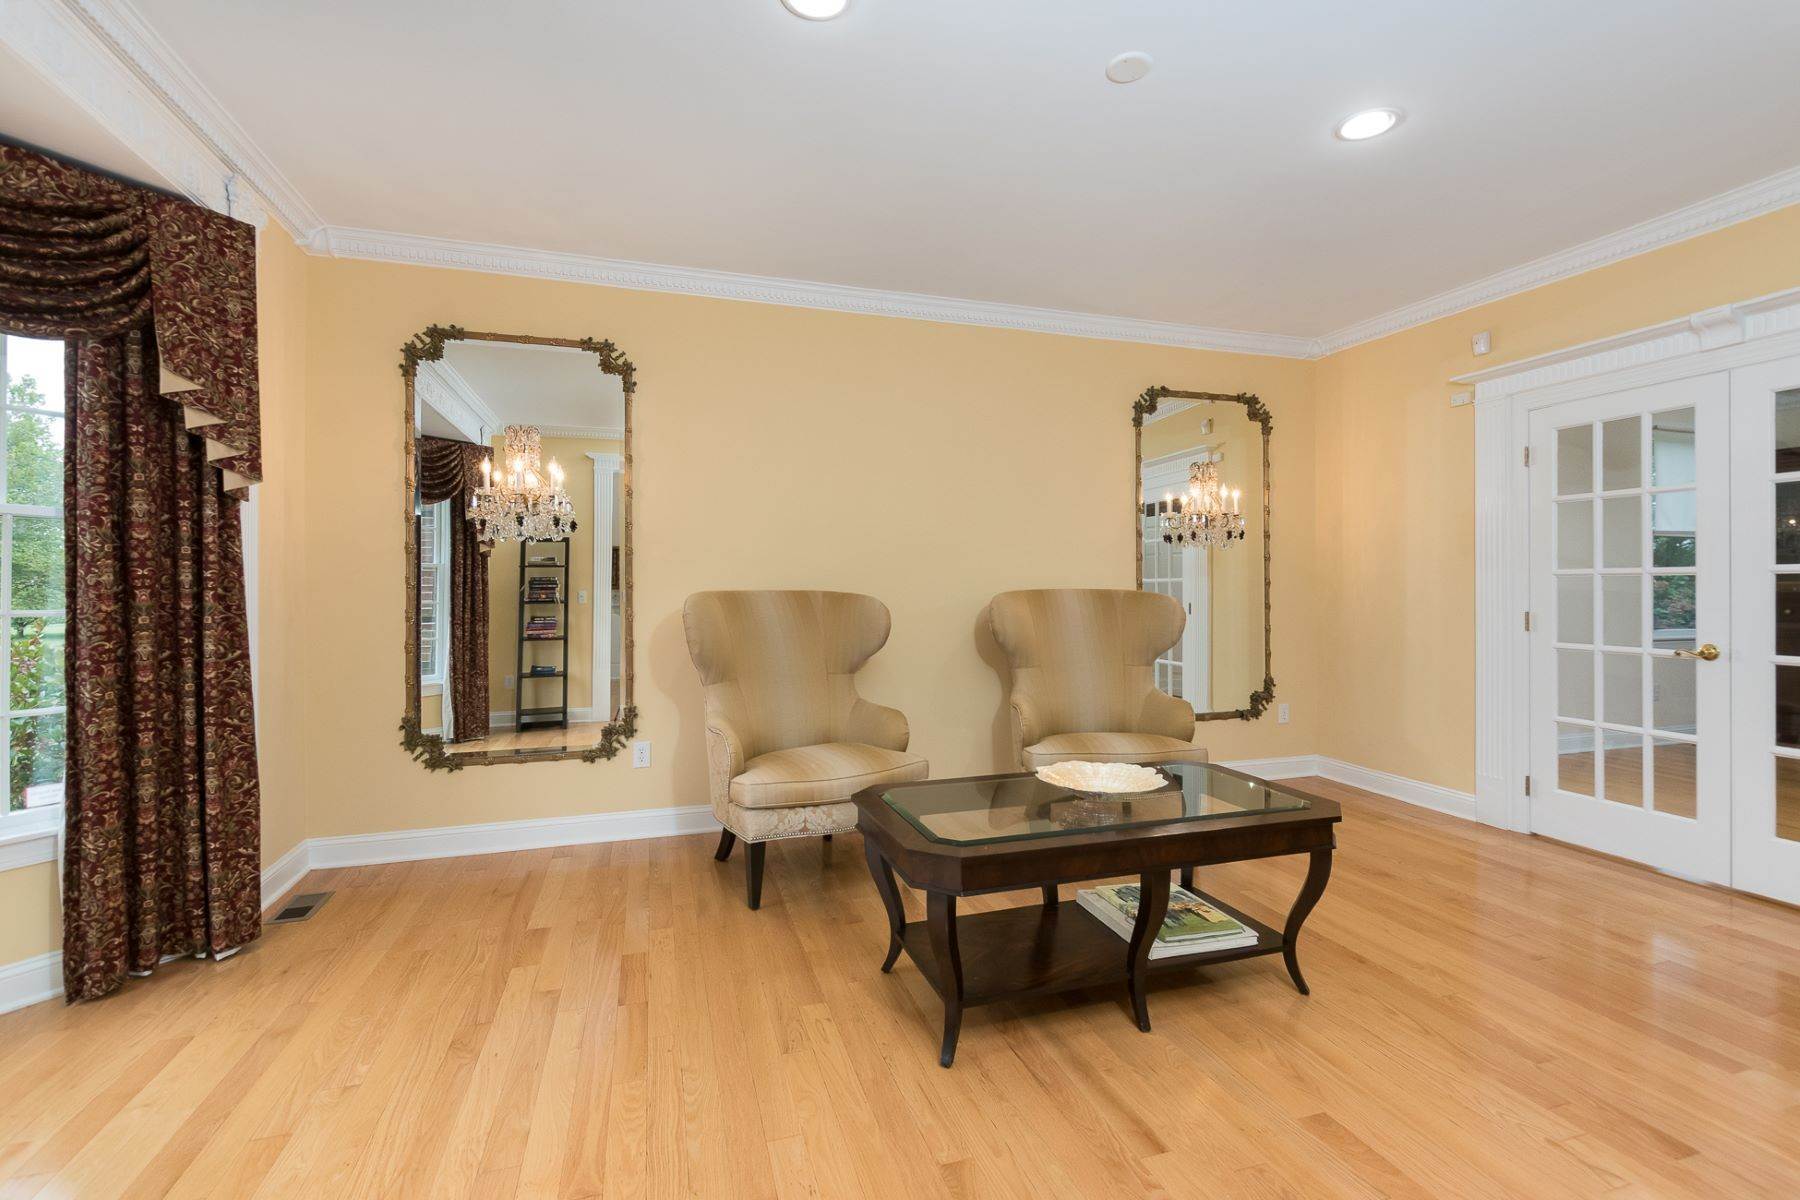 27. Single Family Homes for Sale at Lavish Decor, Indulgent Baths and Party-Ready Pool 305 Cobblestone Way, Lawrence Township, New Jersey 08648 United States